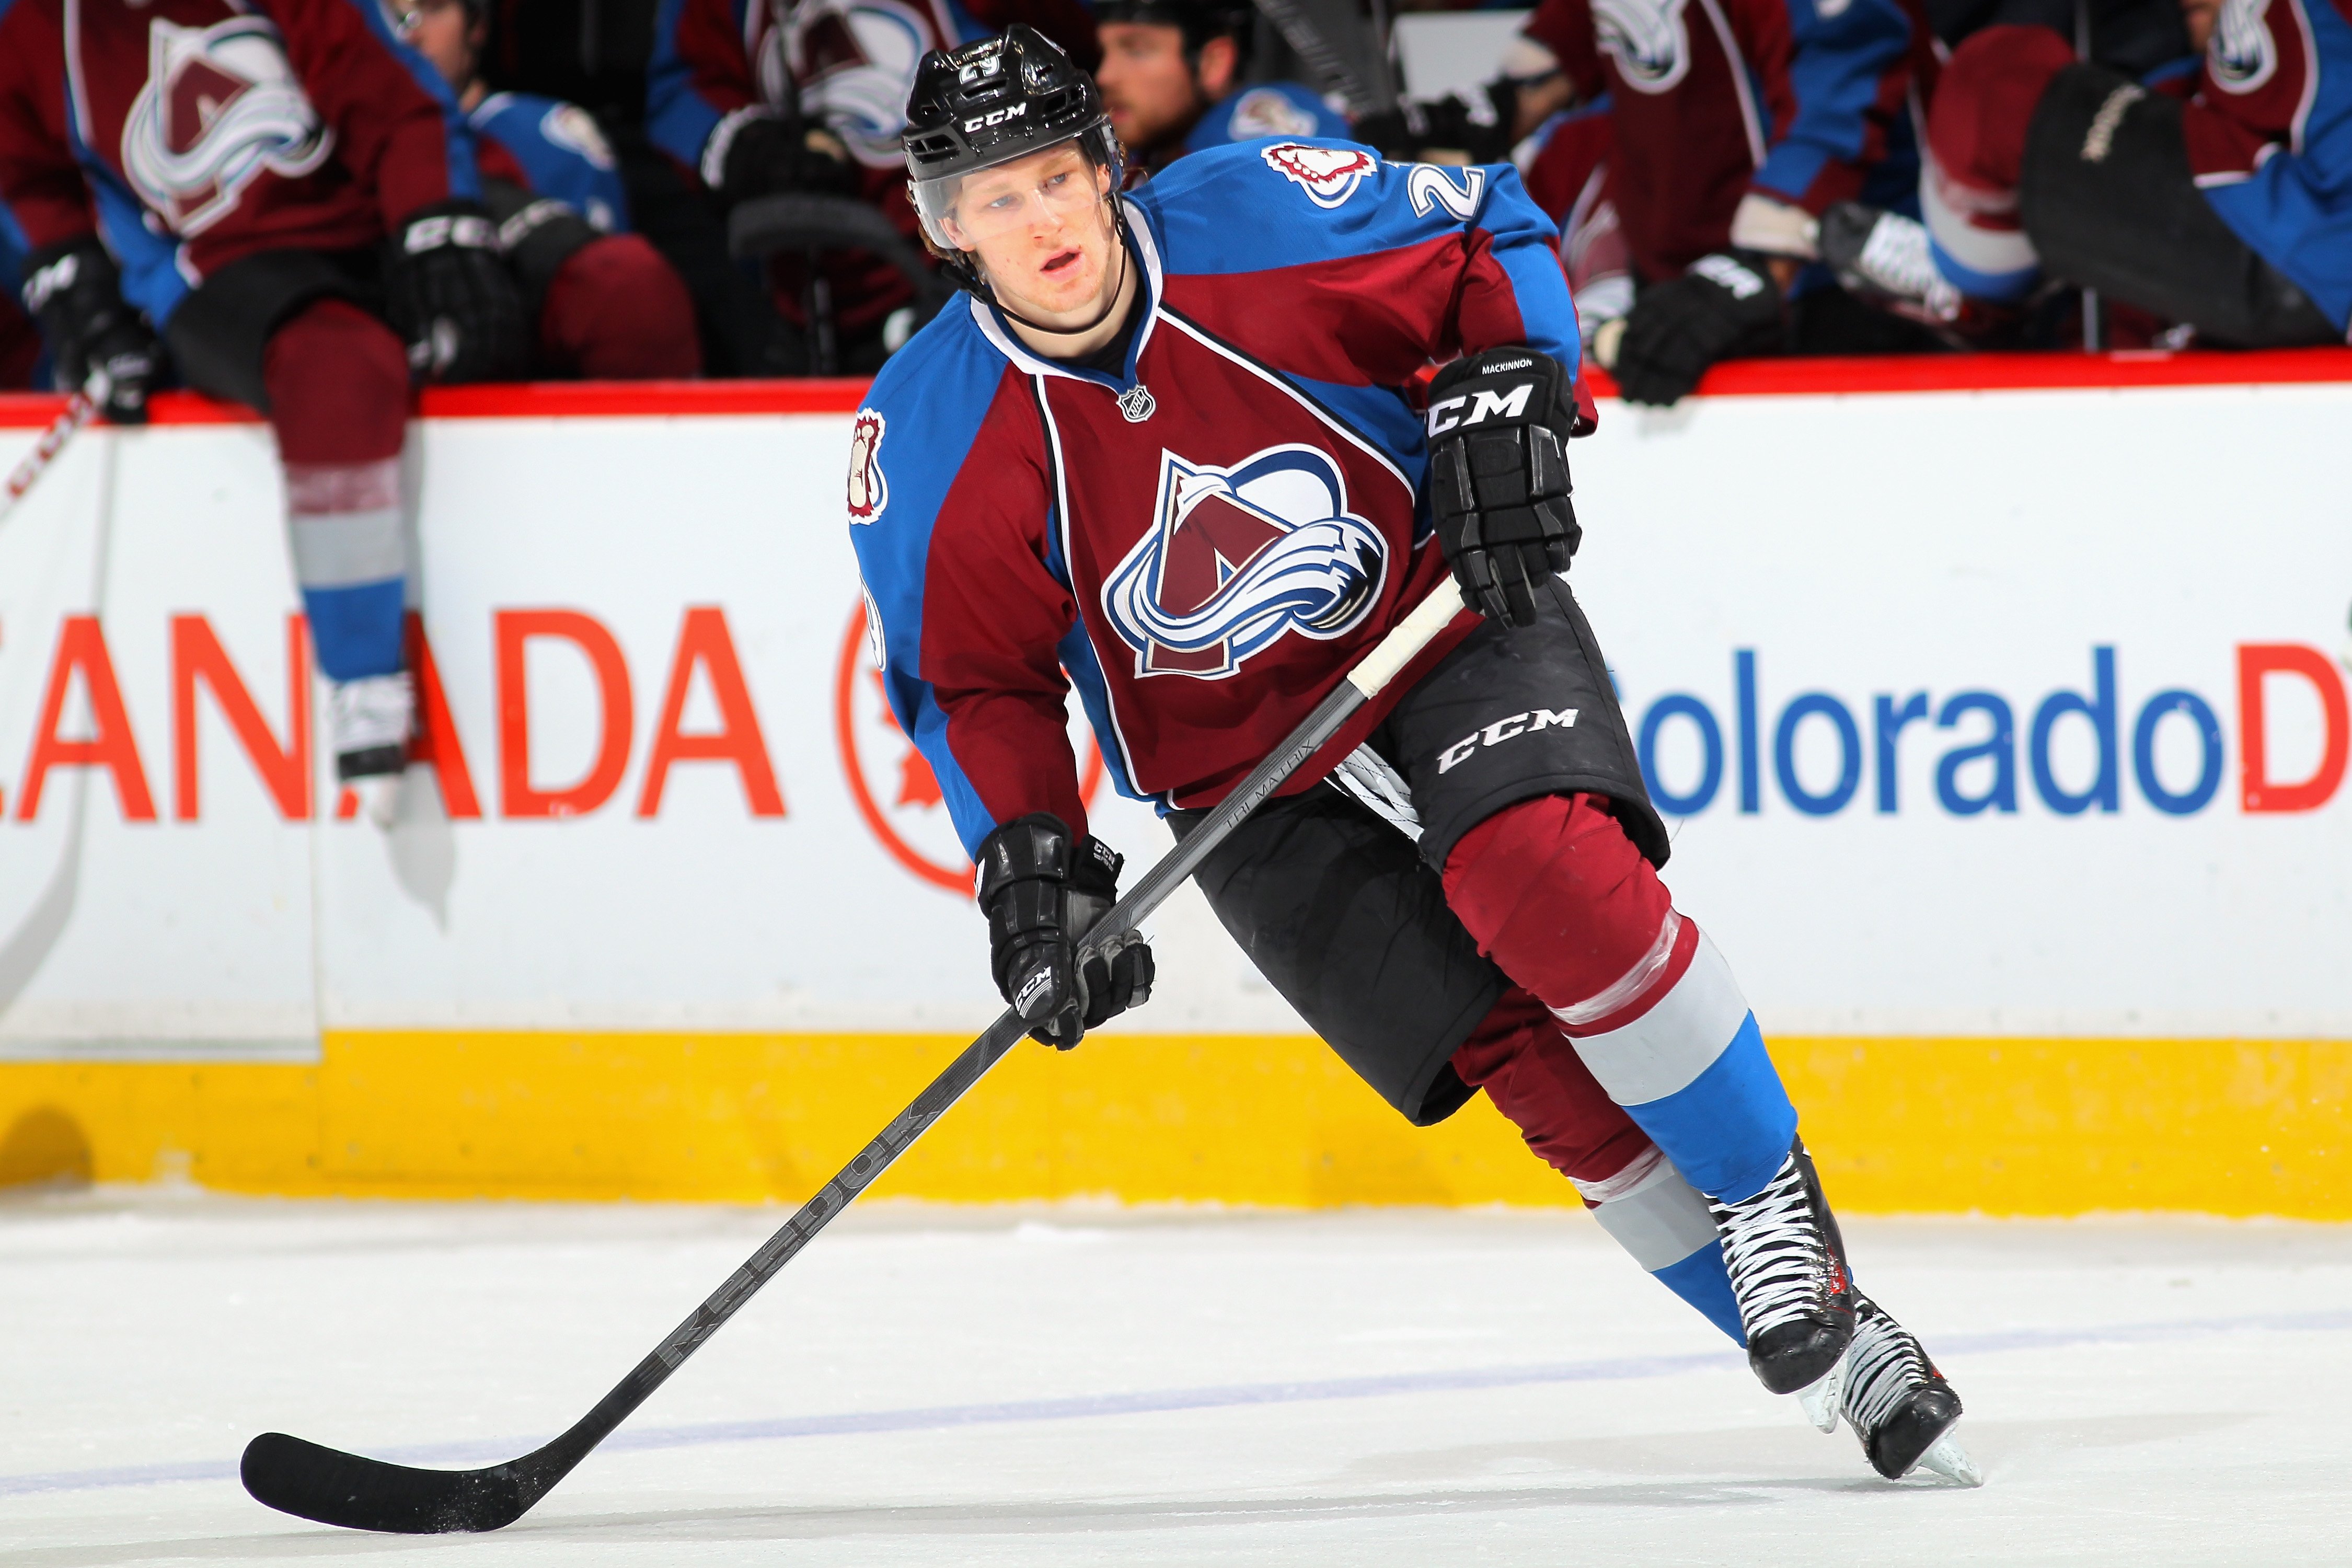 colorado, Avalanche, Nhl, Hockey, 34 Wallpapers HD / Desktop and Mobile